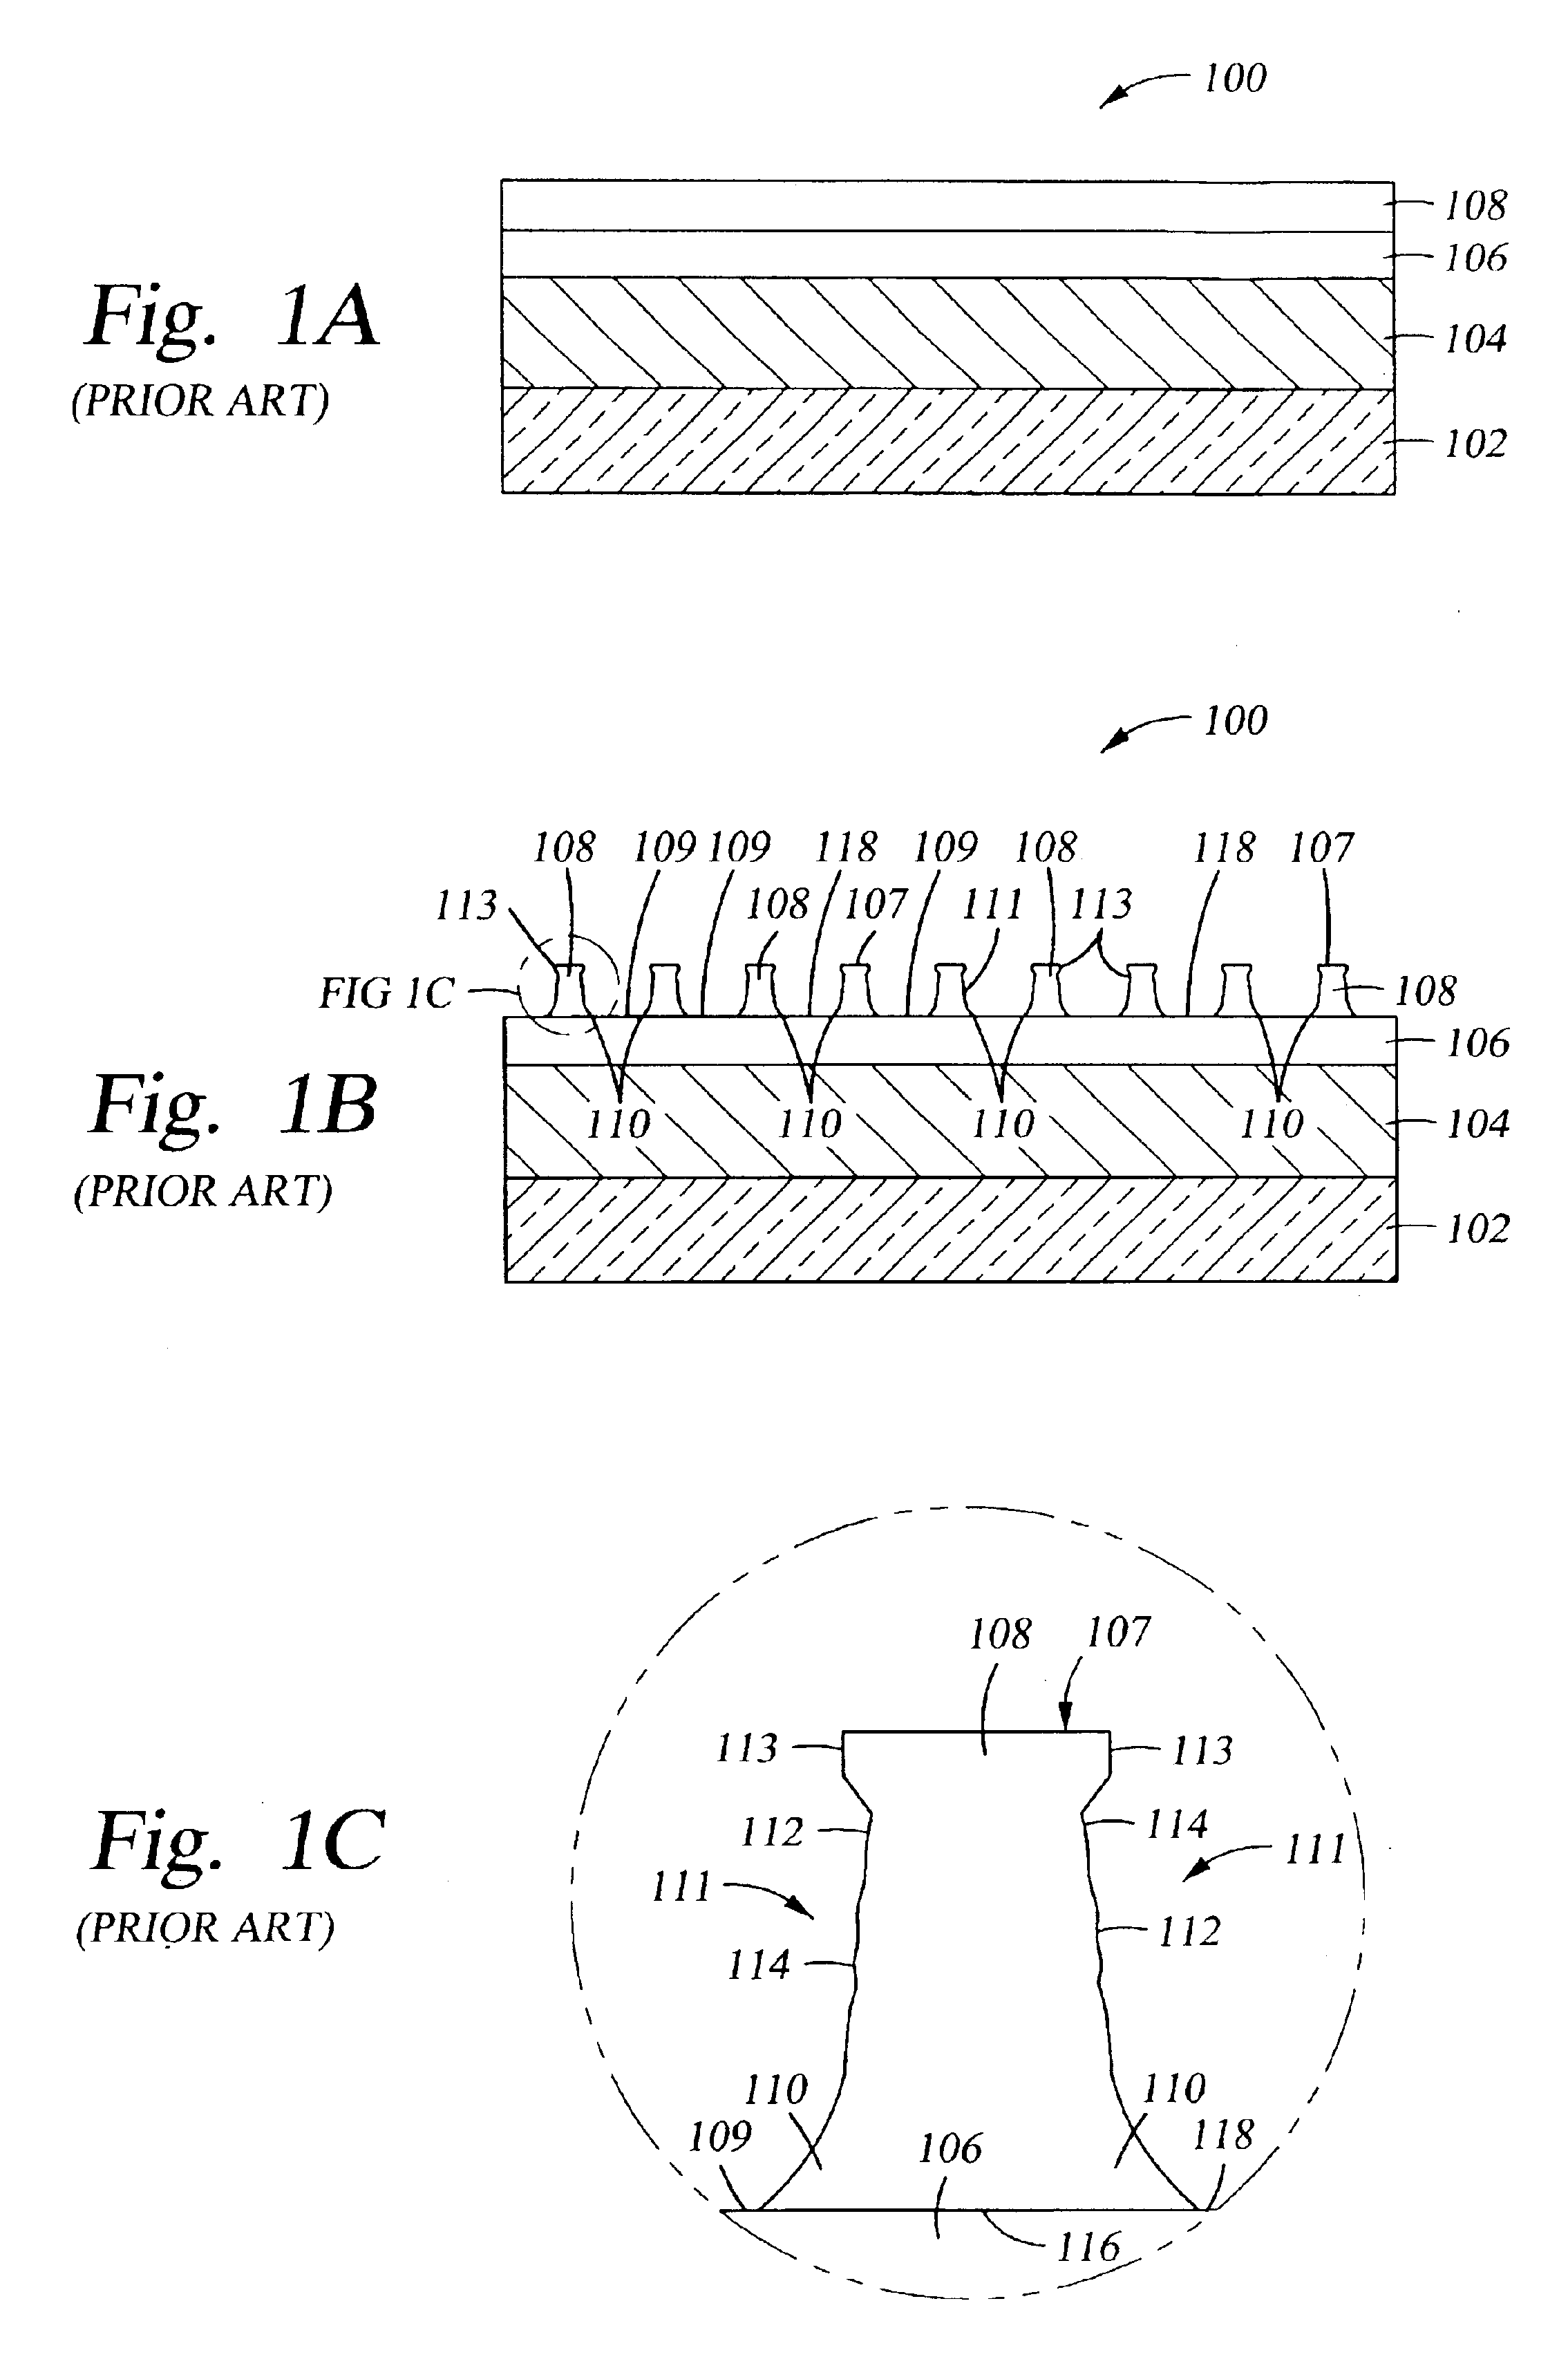 Apparatus for reshaping a patterned organic photoresist surface